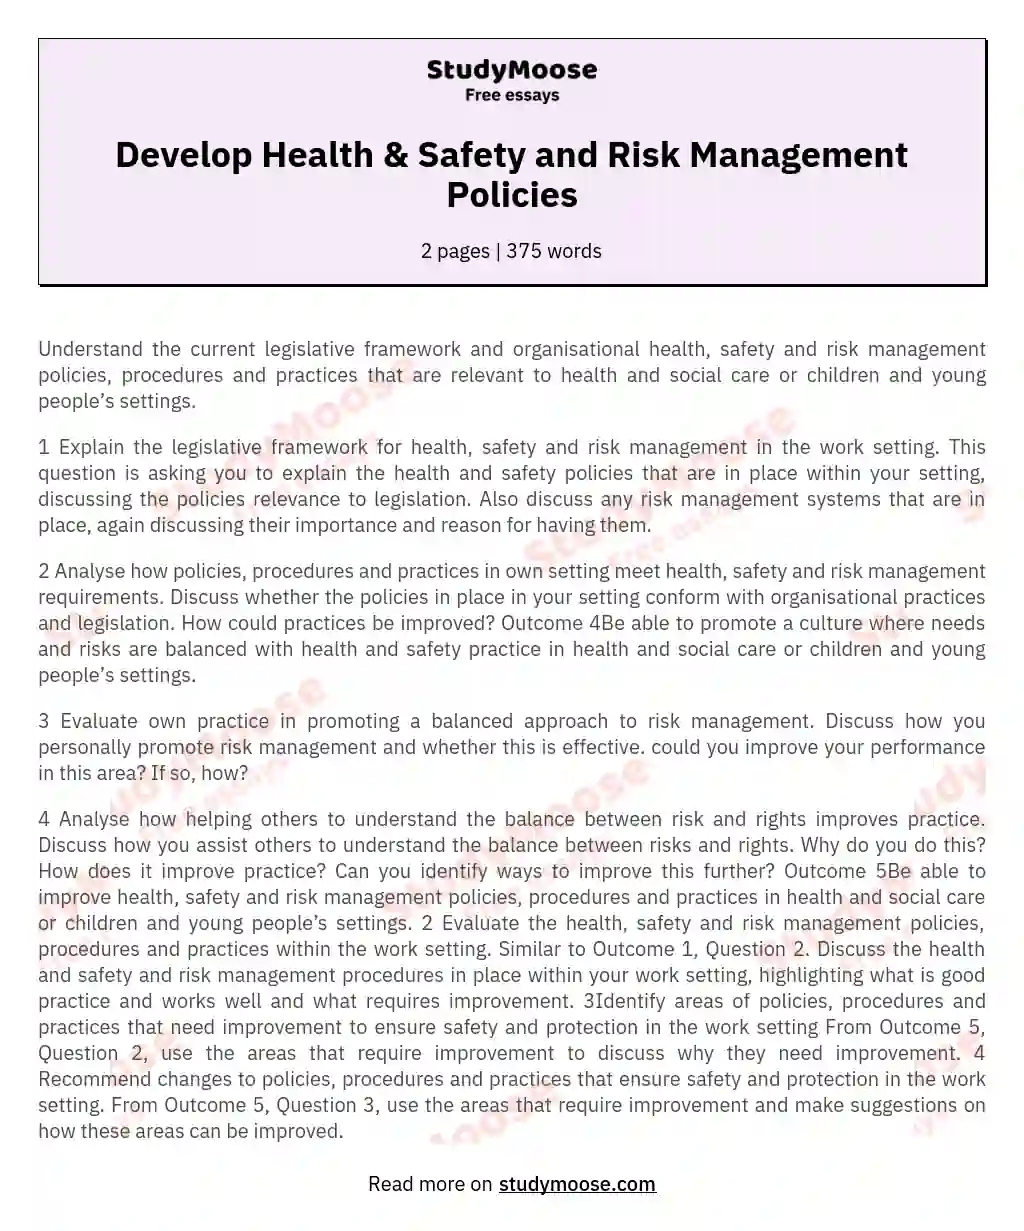 Develop Health & Safety and Risk Management Policies essay